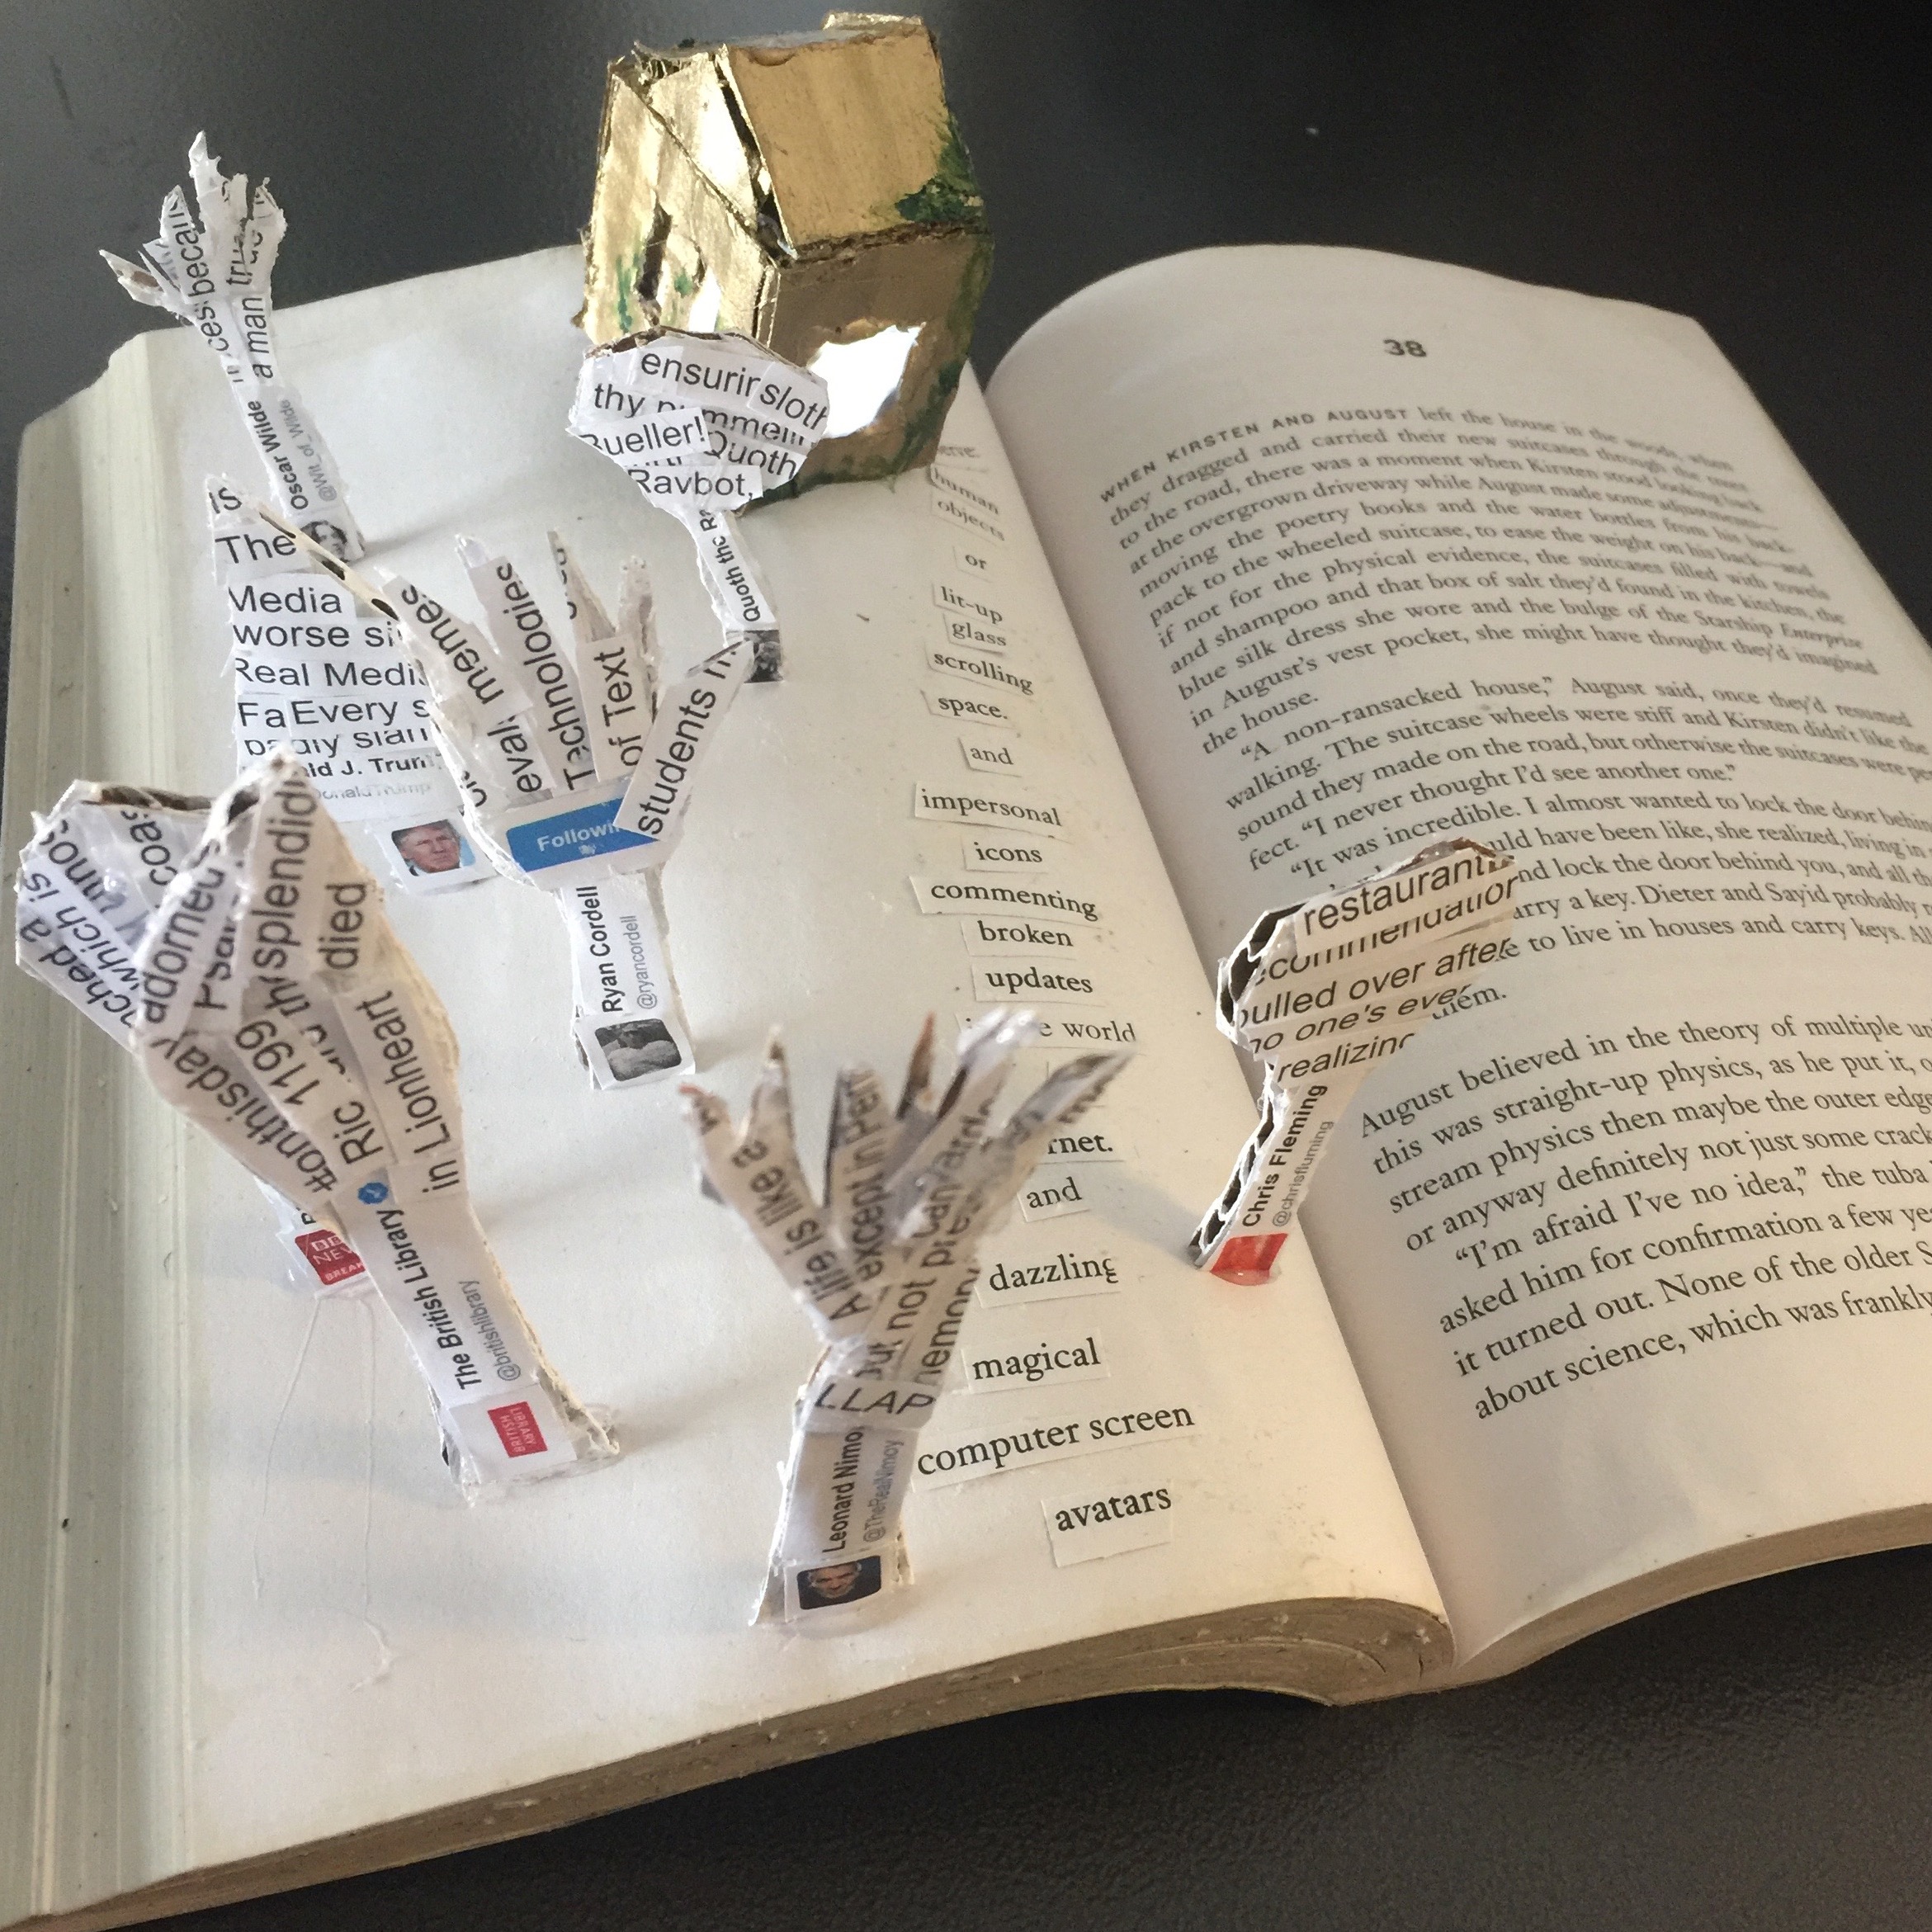 An altered book project